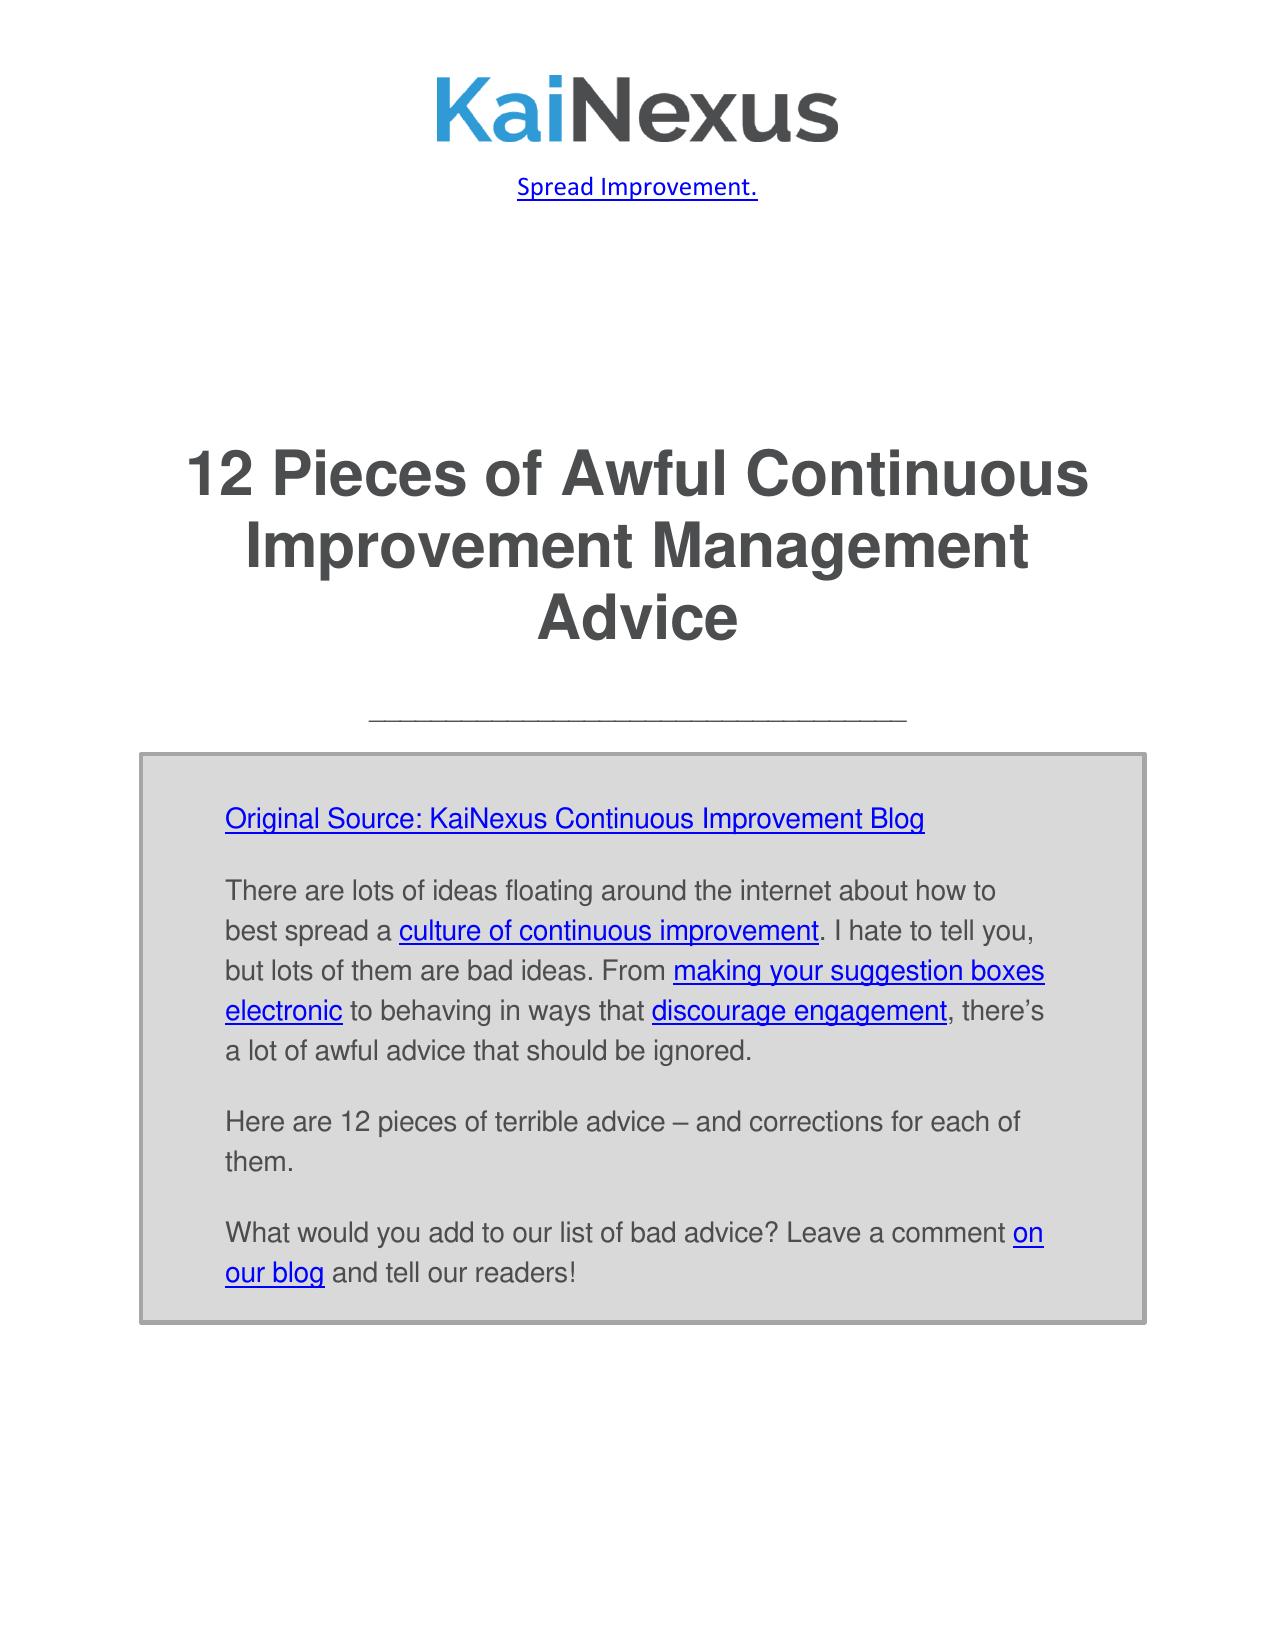 12 Pieces of Awful Continuous Improvement Management Advice